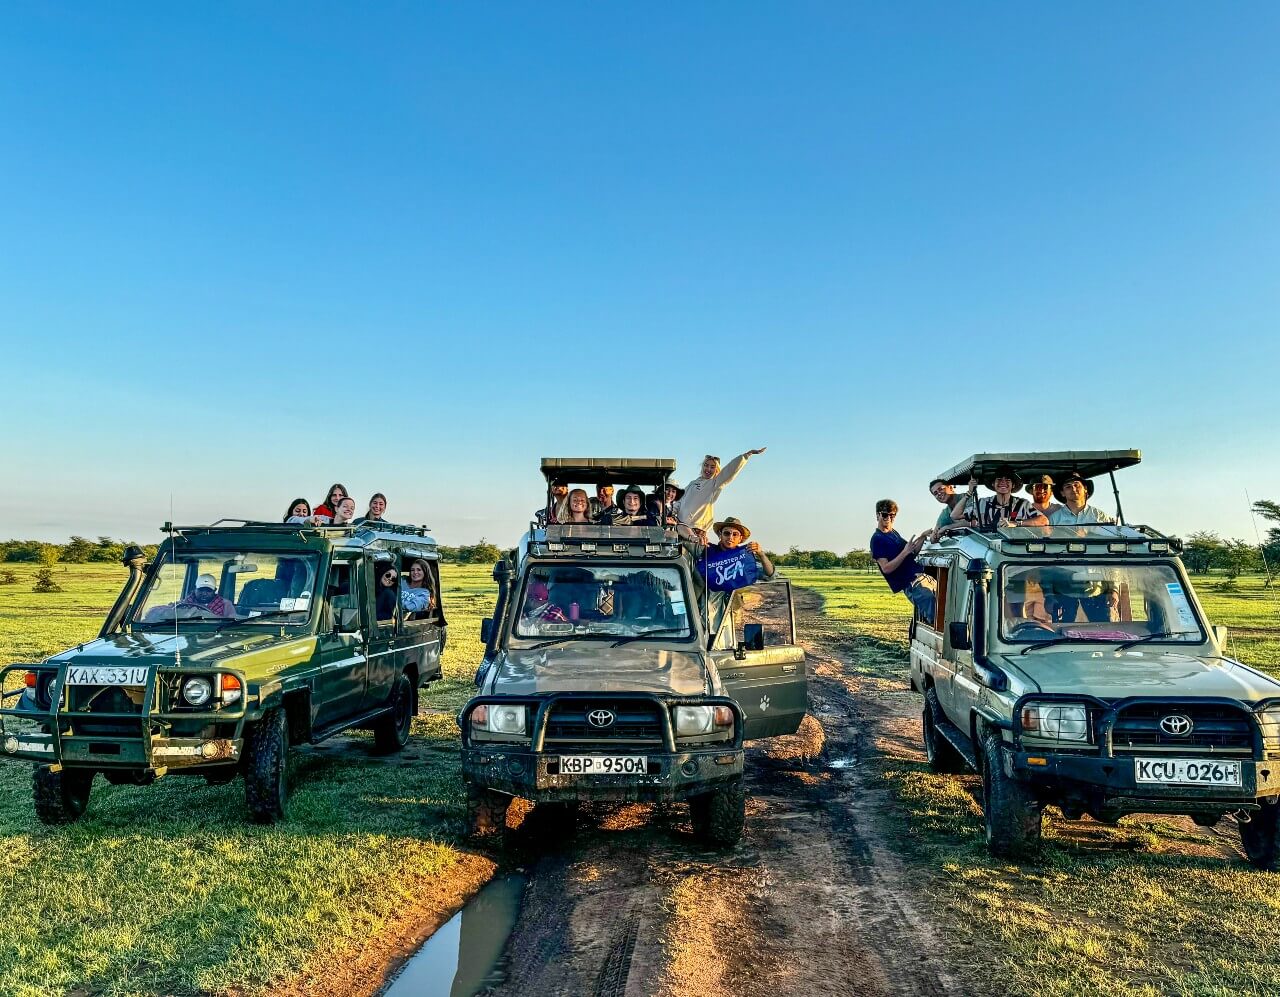 Three rugged, pop-top safari vehicles are parked next to one another on a grassy plain. Each vehicle is filled with smiling people leaning out of the windows and skylights, one of whom holds a blue flag that says “Semester at Sea.”